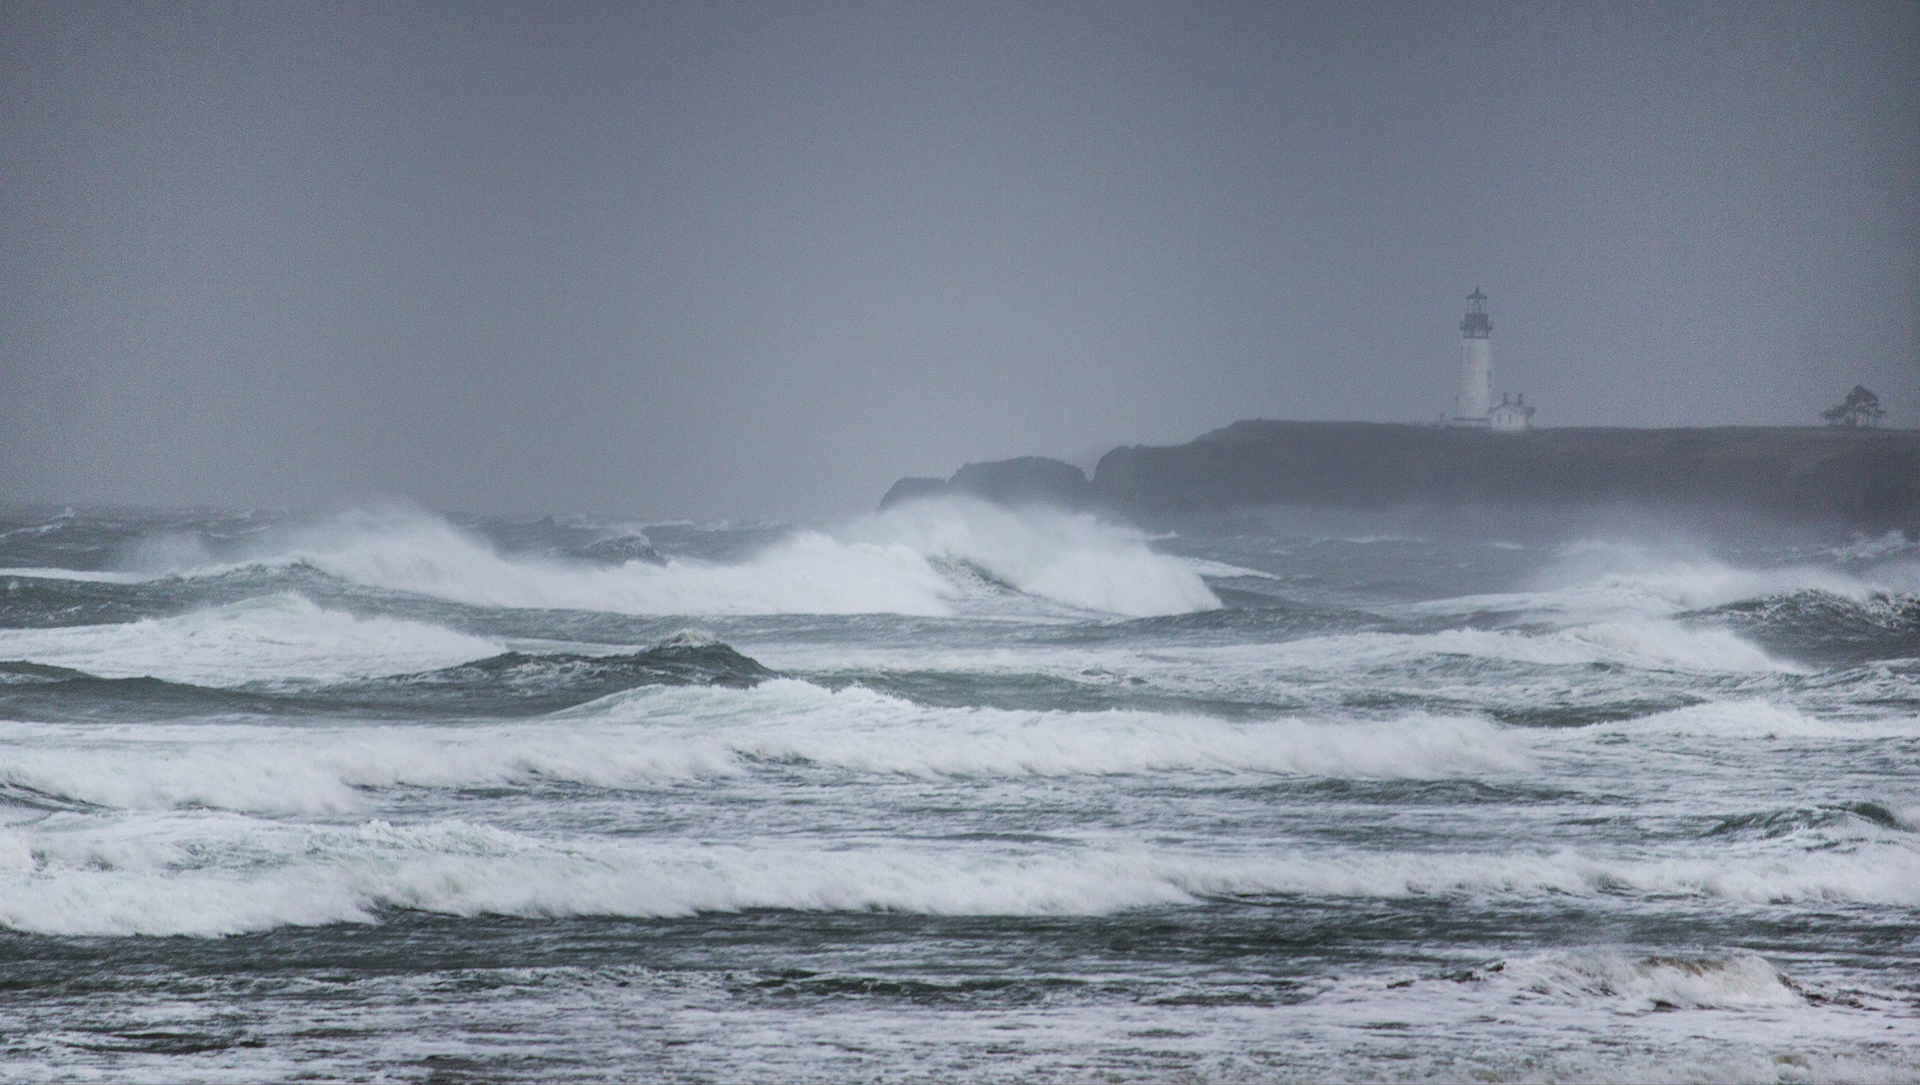 huge waves and gray sky with a lighthouse visible in the background at Yaquina 